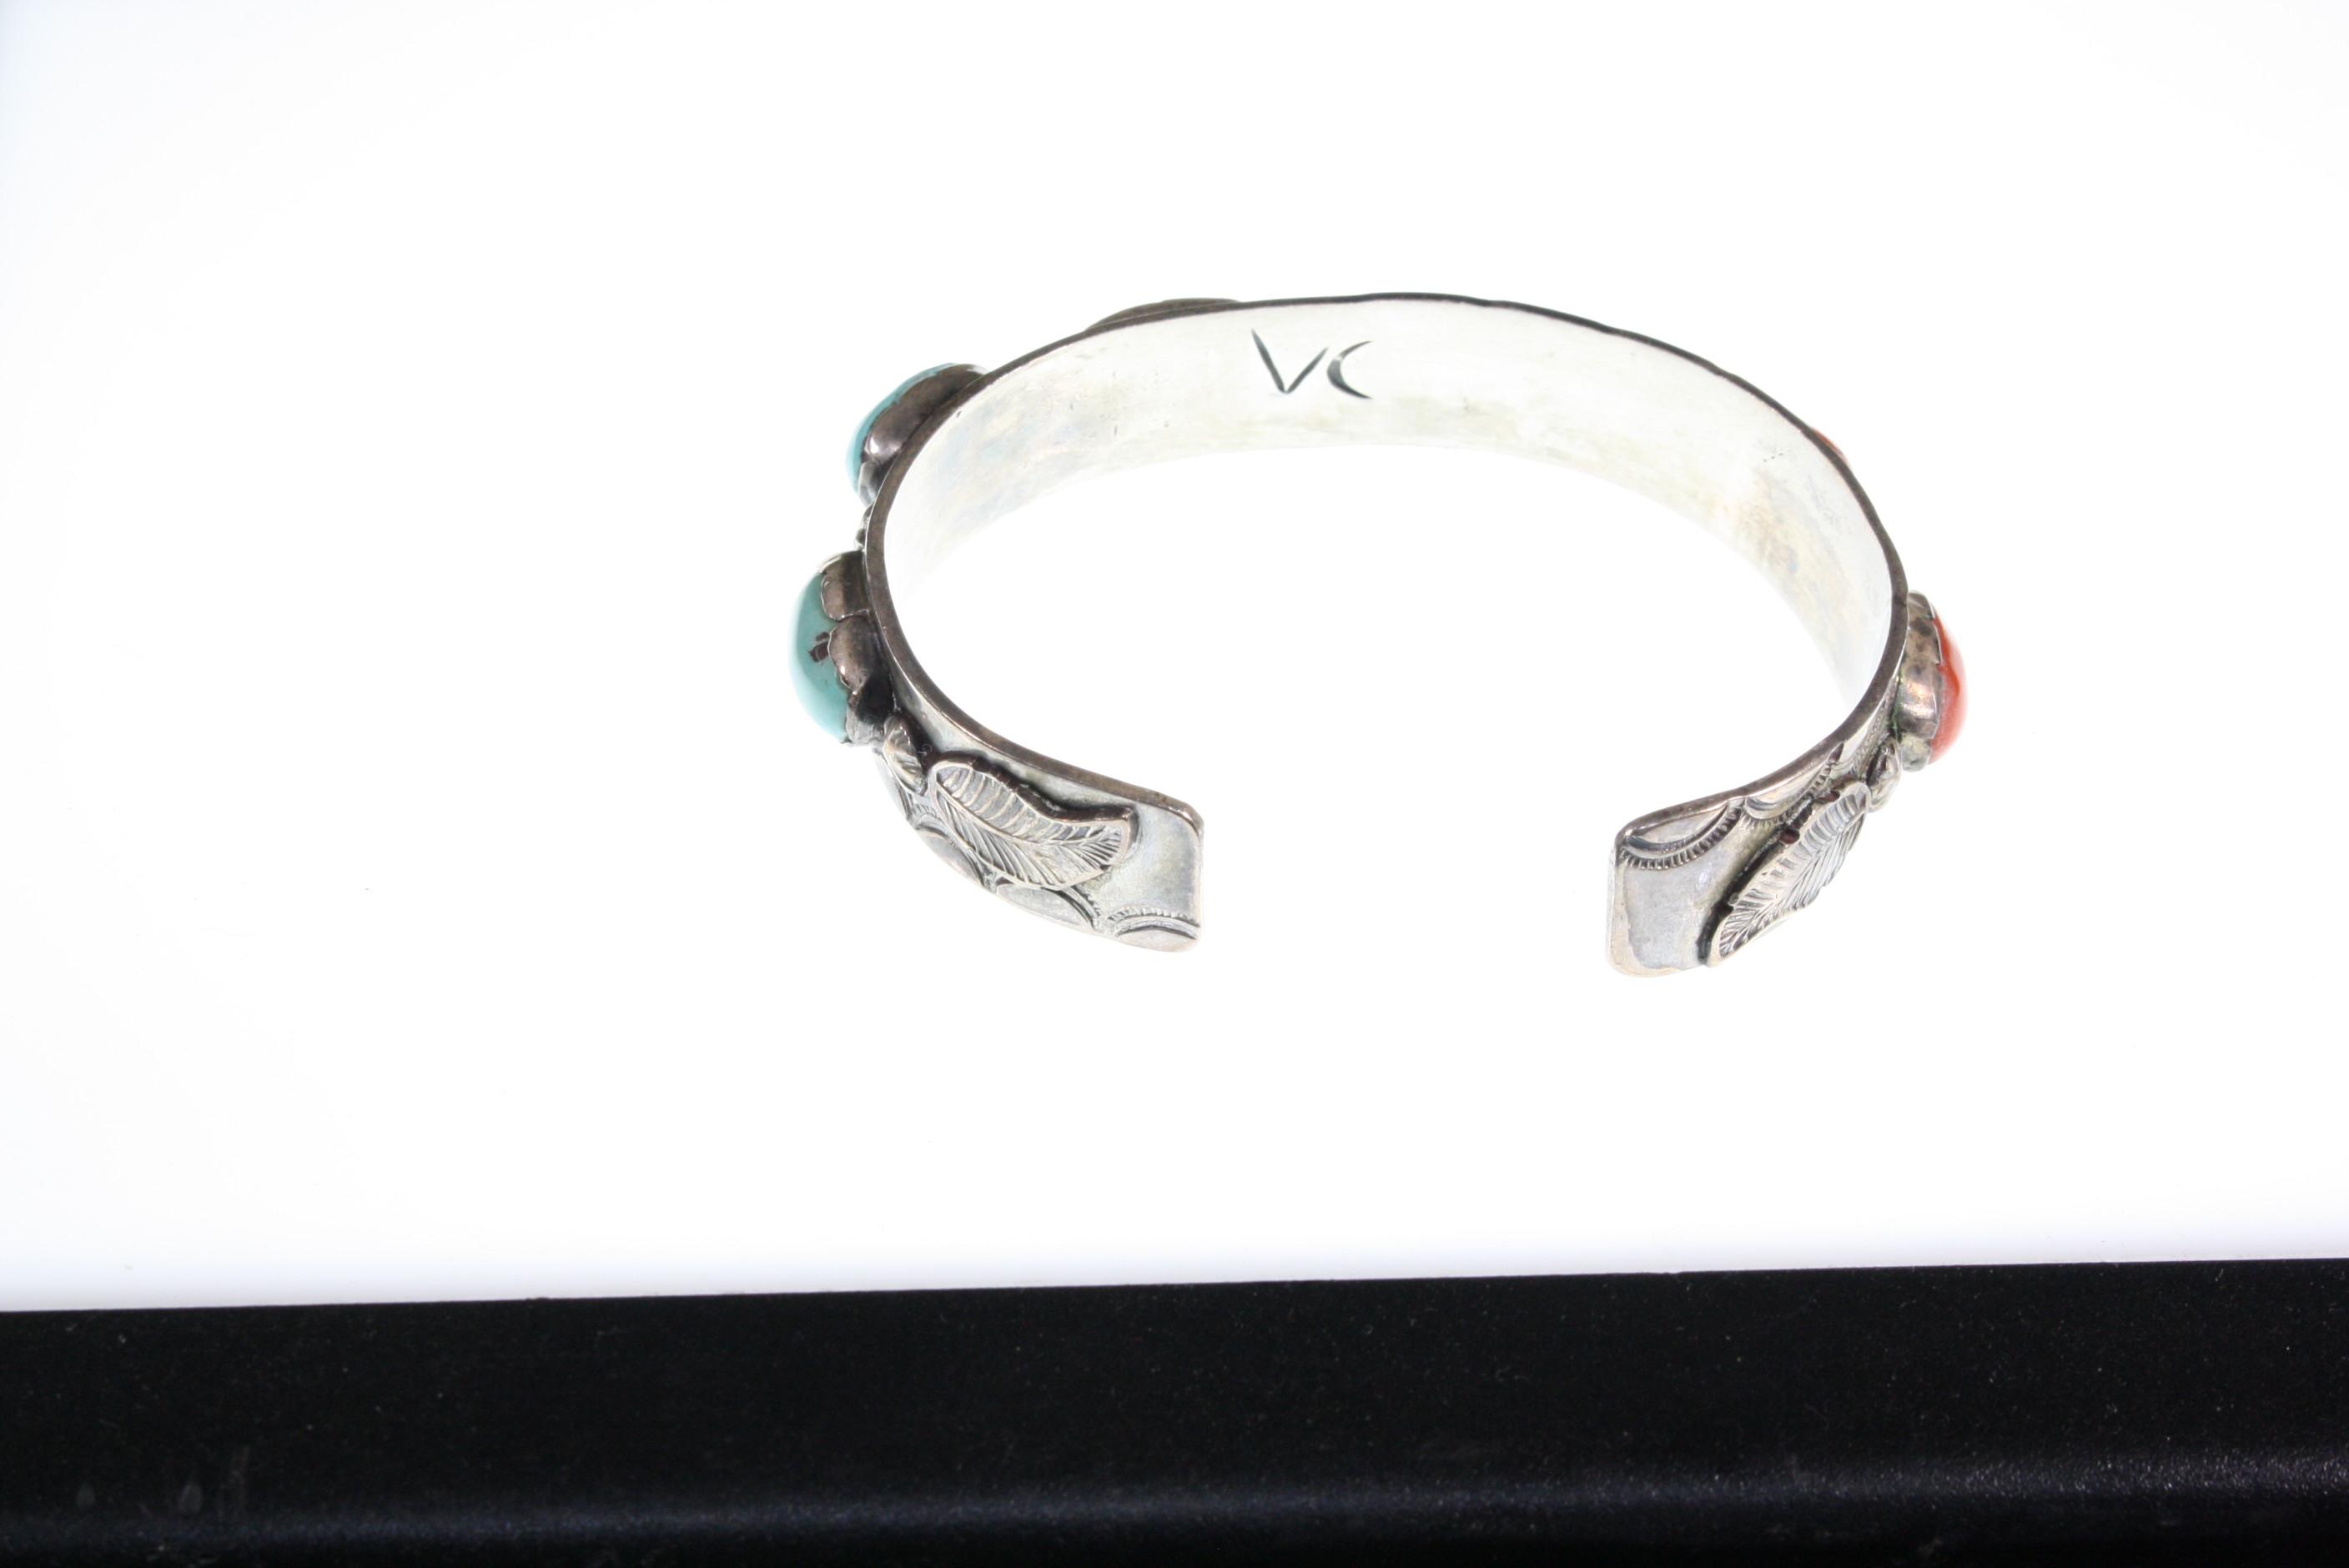 Antique silver Indian bracelet with turquoise and coral